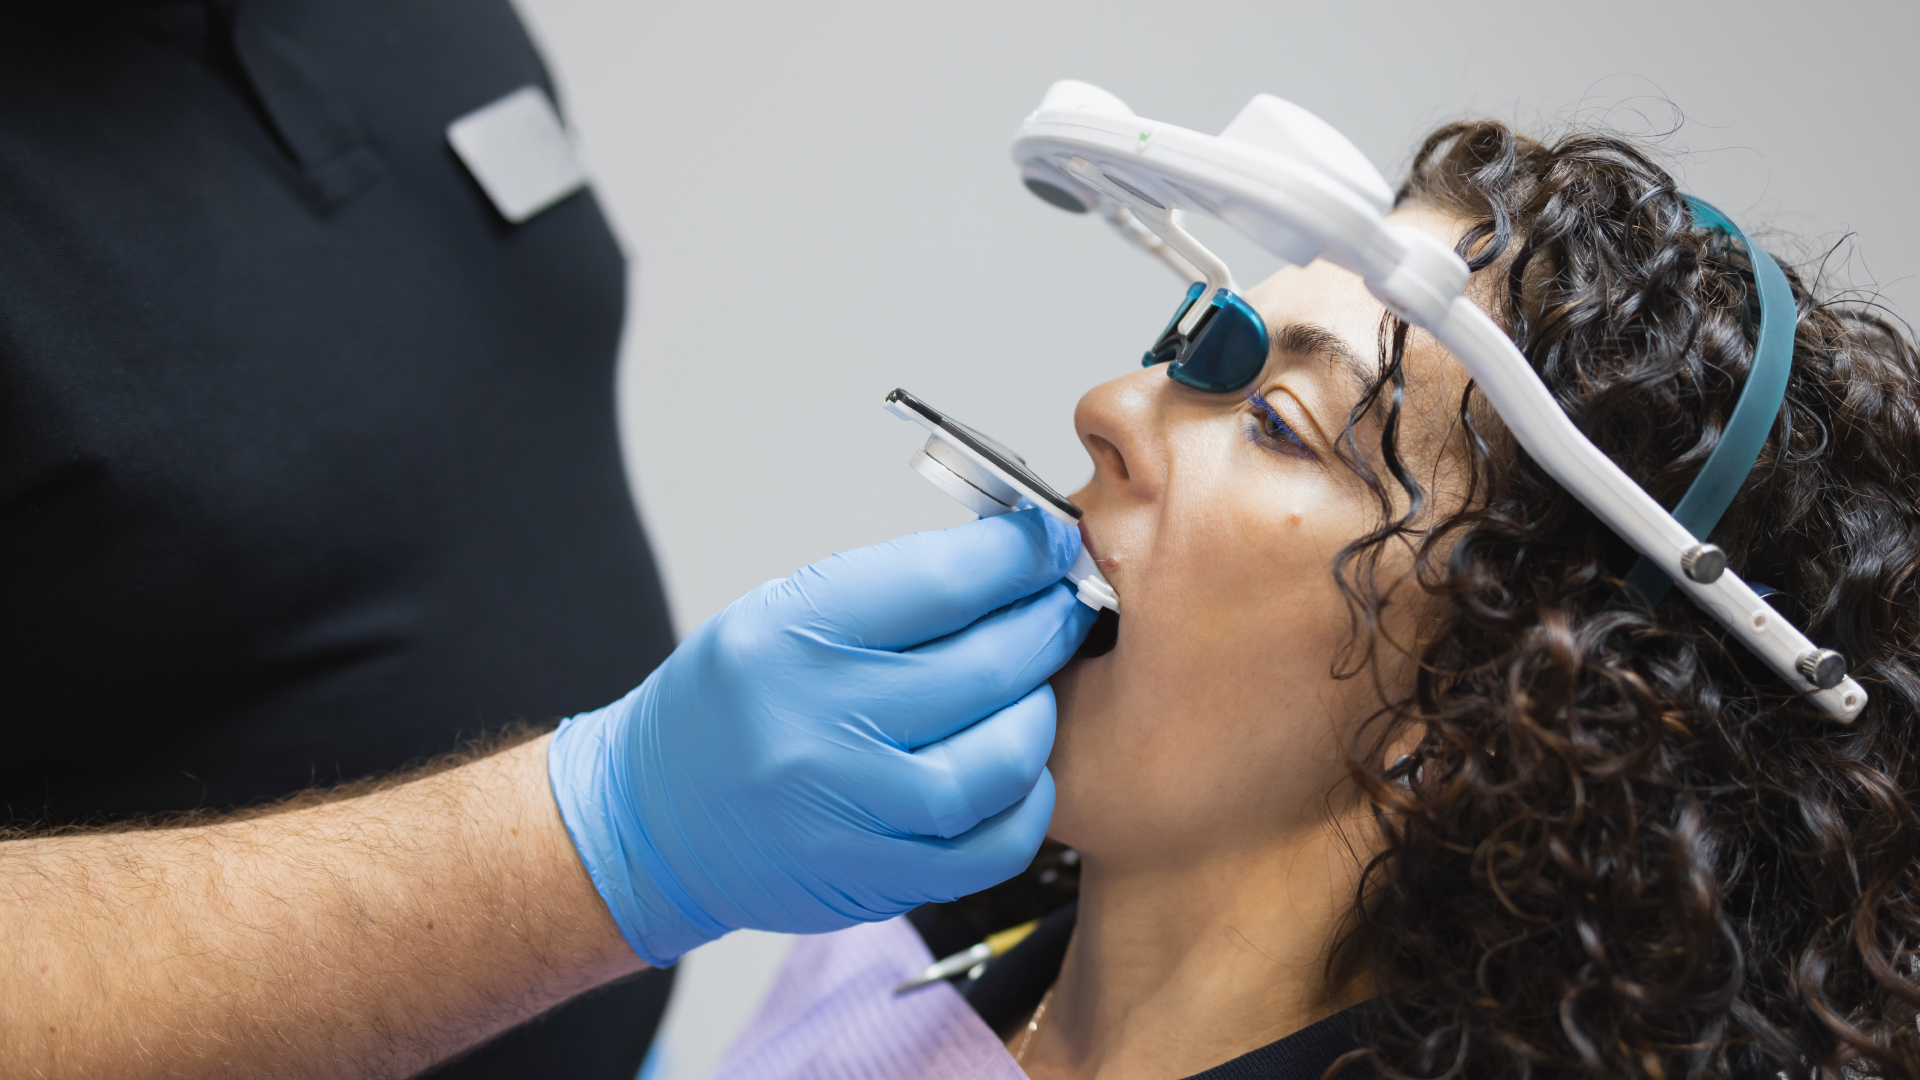 a dentist scanning the occlusion of a patient